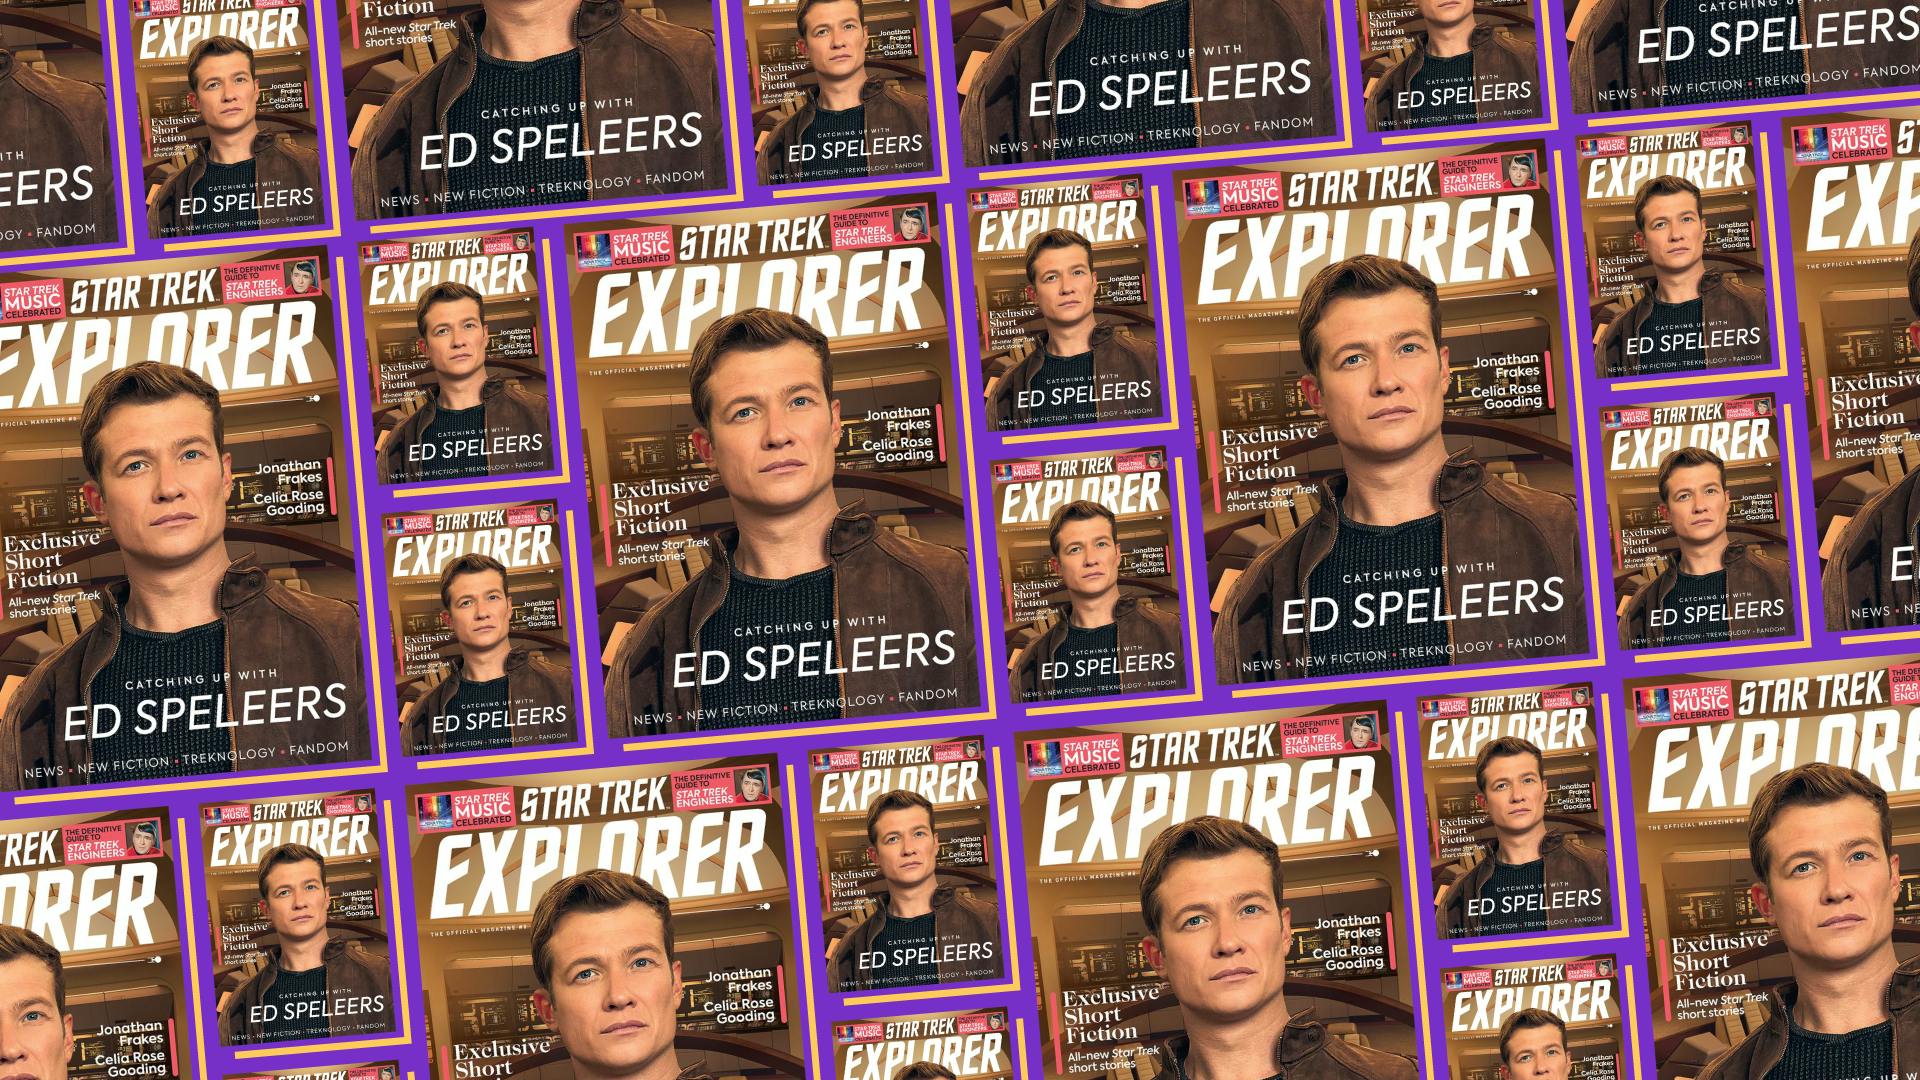 Illustrated banner featuring Star Trek Explorer #8 with Ed Speleers on the cover